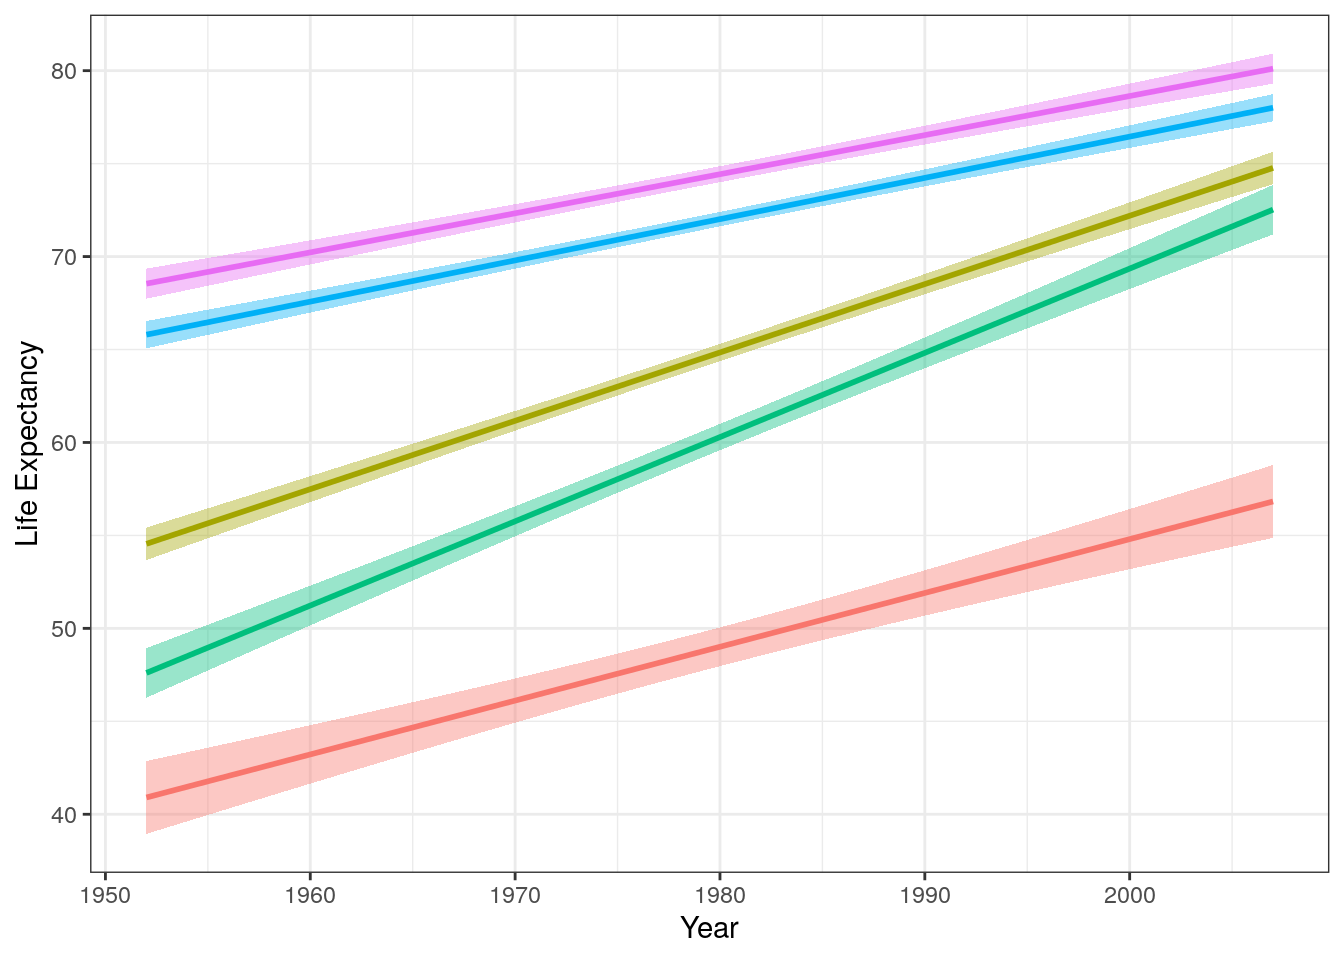 Trend lines for average life expectancy per year for different continents.